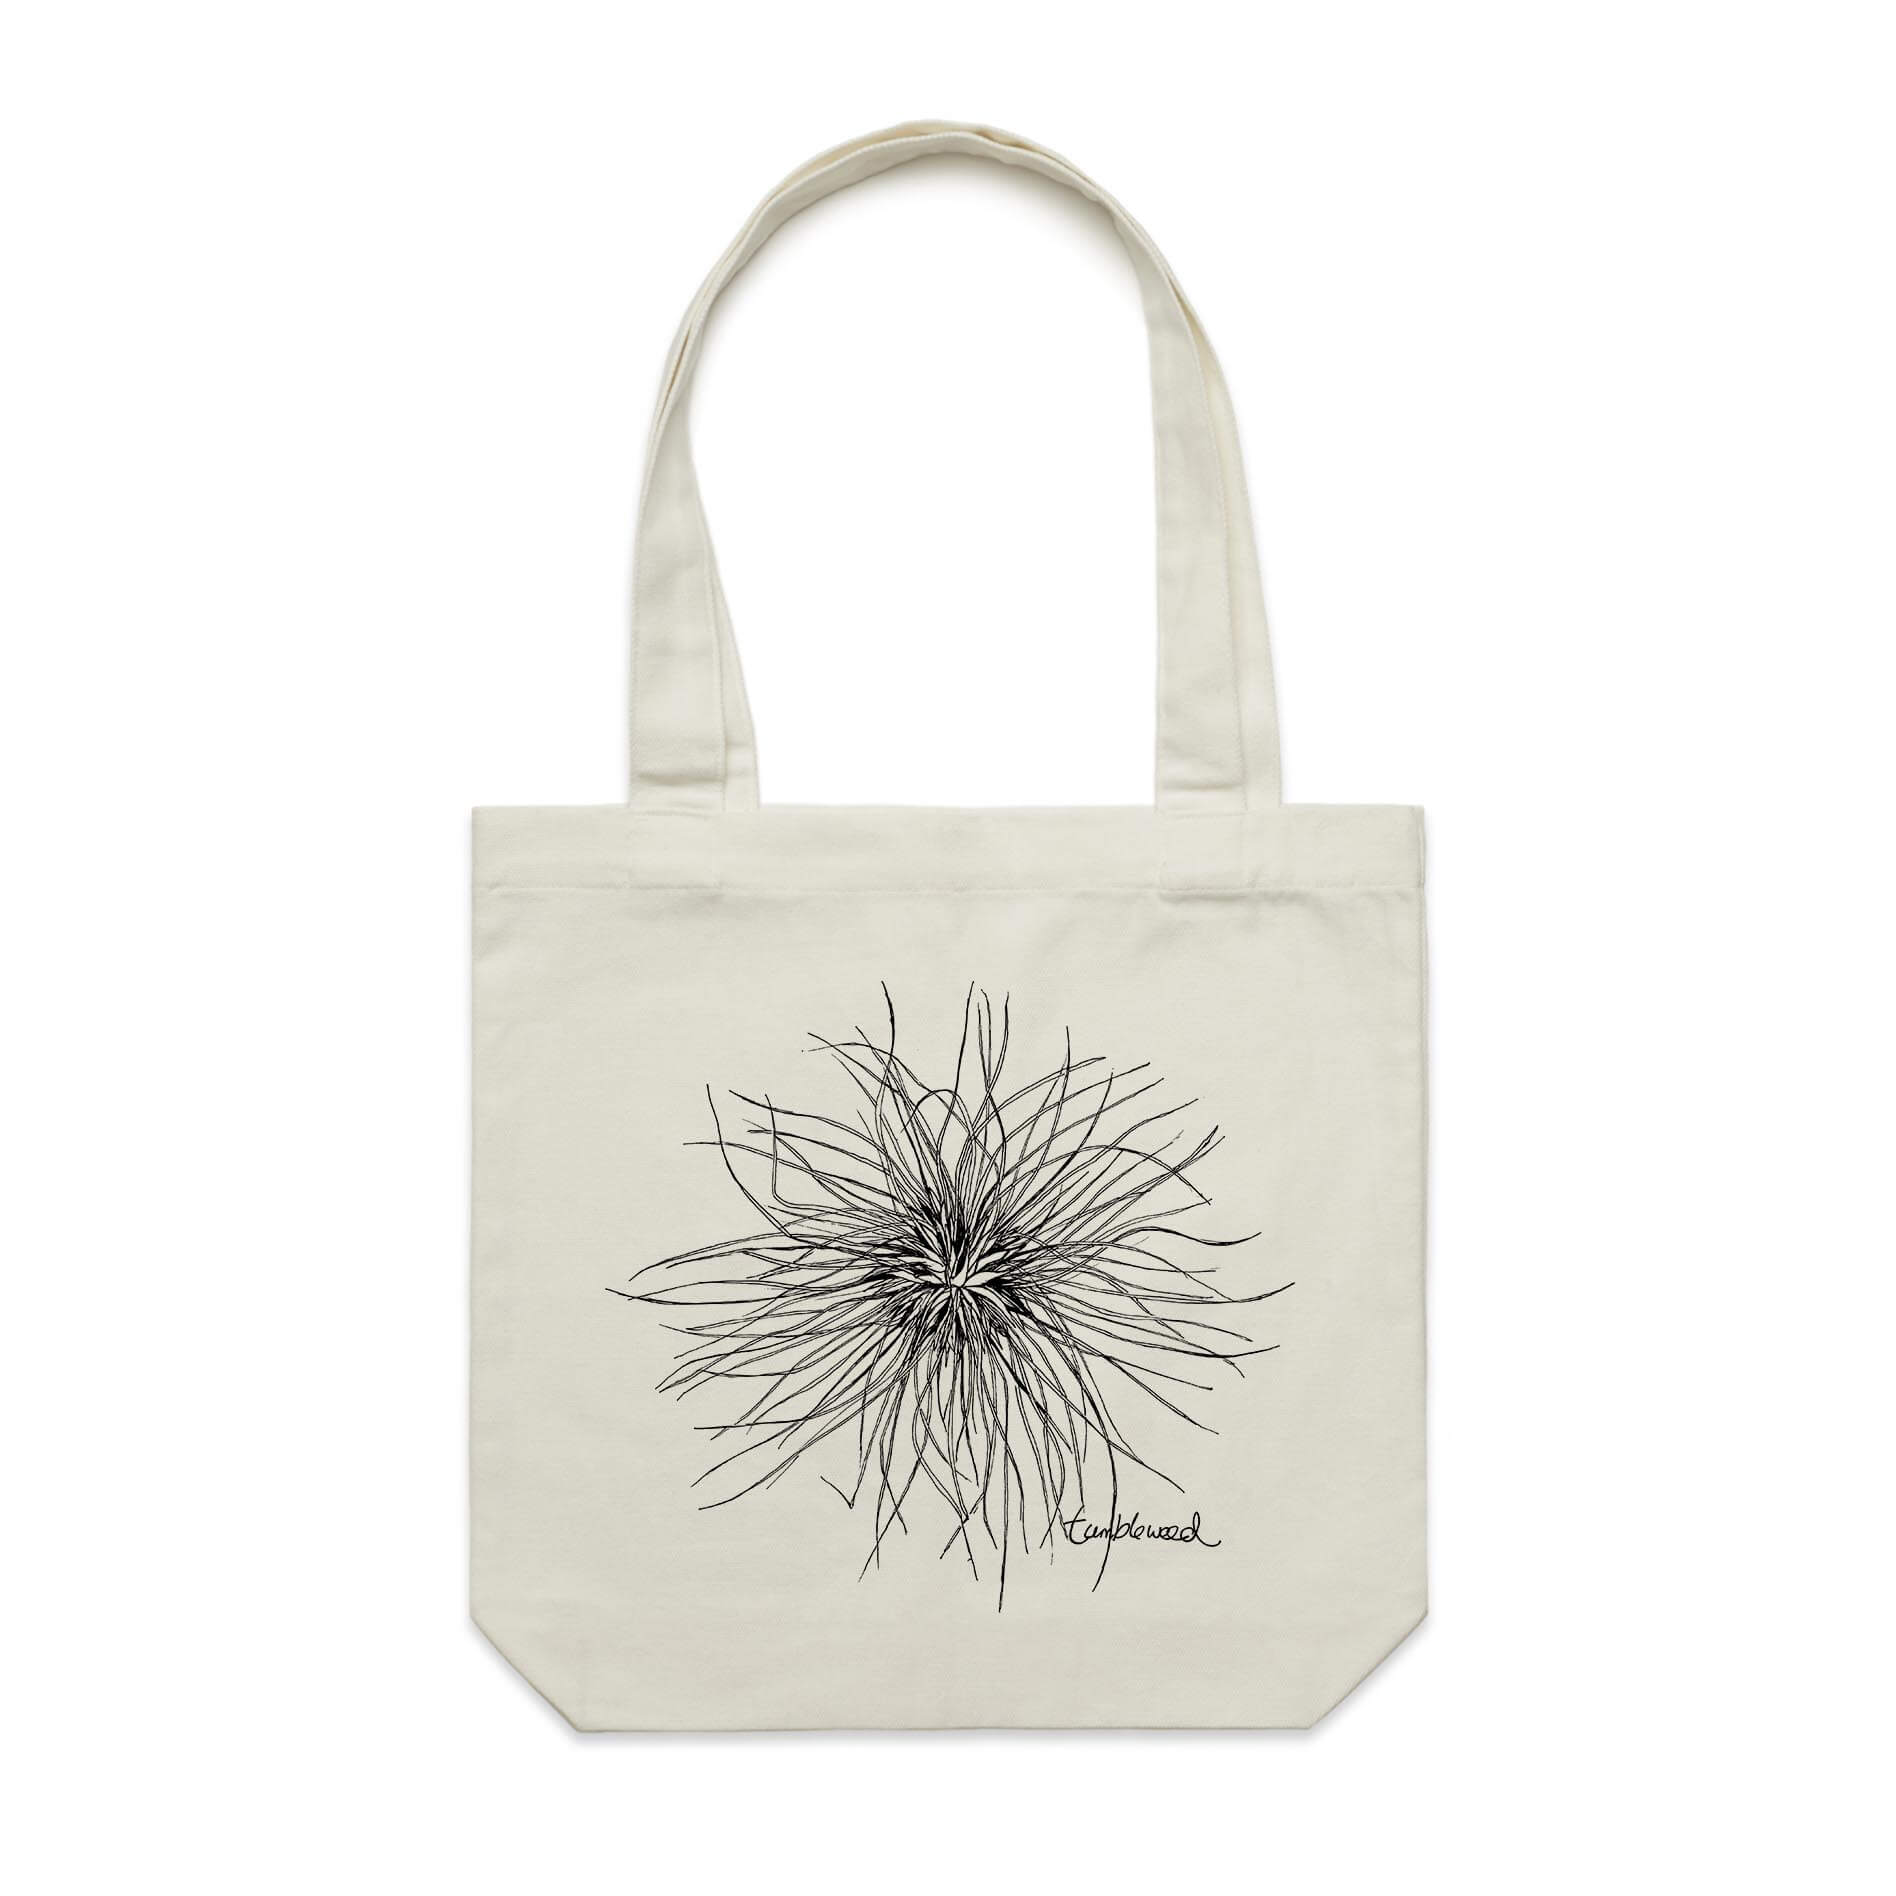 Cotton canvas tote bag with a screen printed Tumbleweed design.